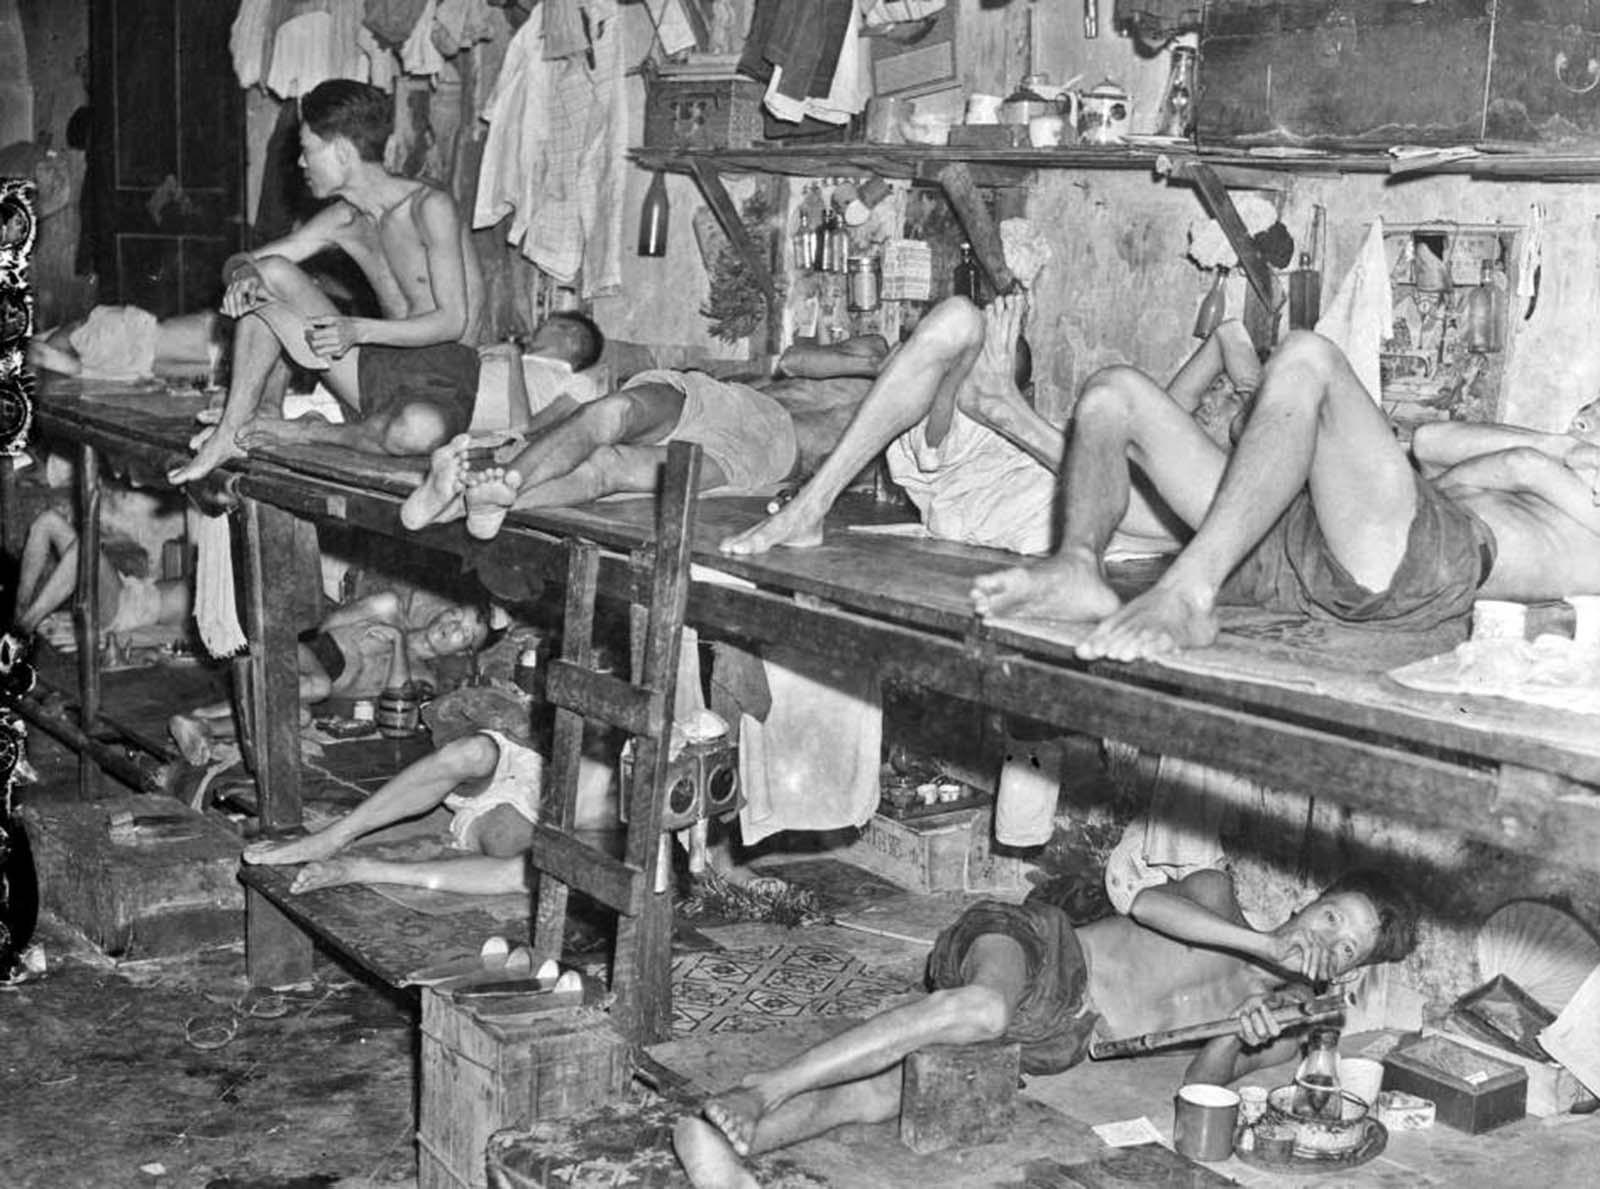 Pictures Of An Opium Den In Singapore In 1941 Vintage Everyday